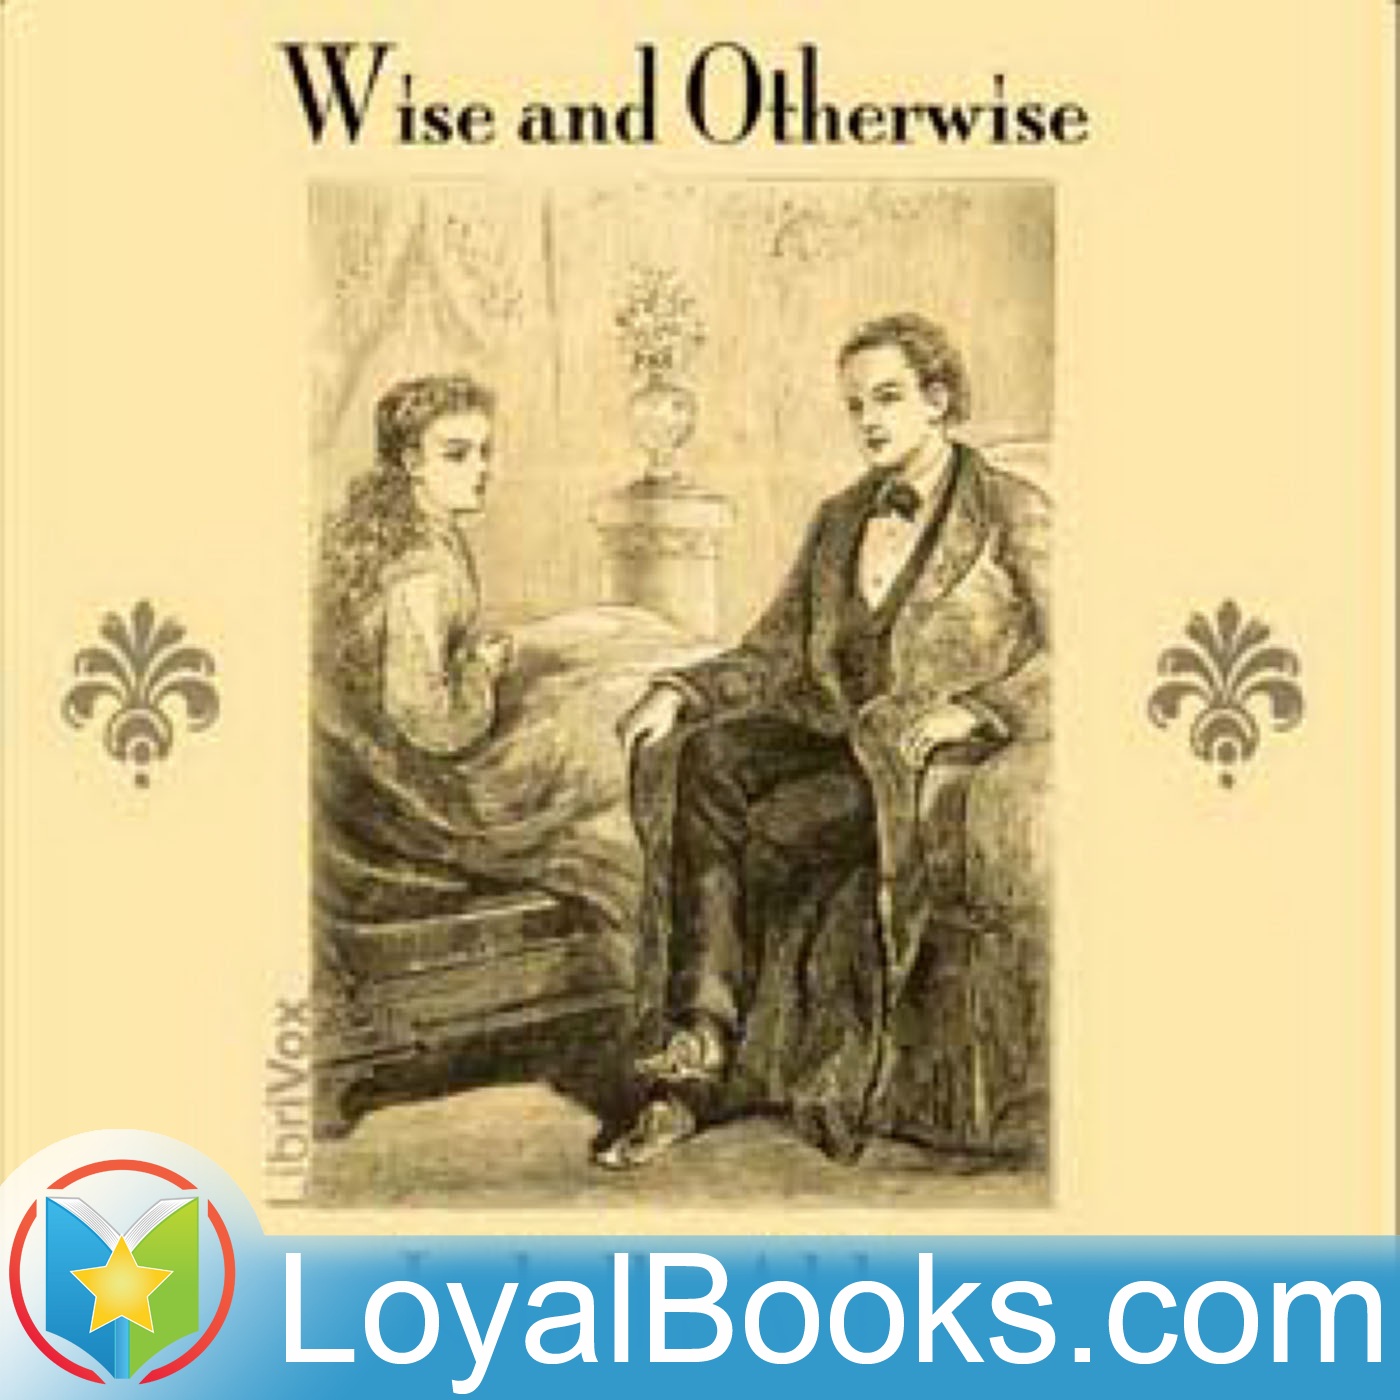 Wise and Otherwise by Isabella Alden